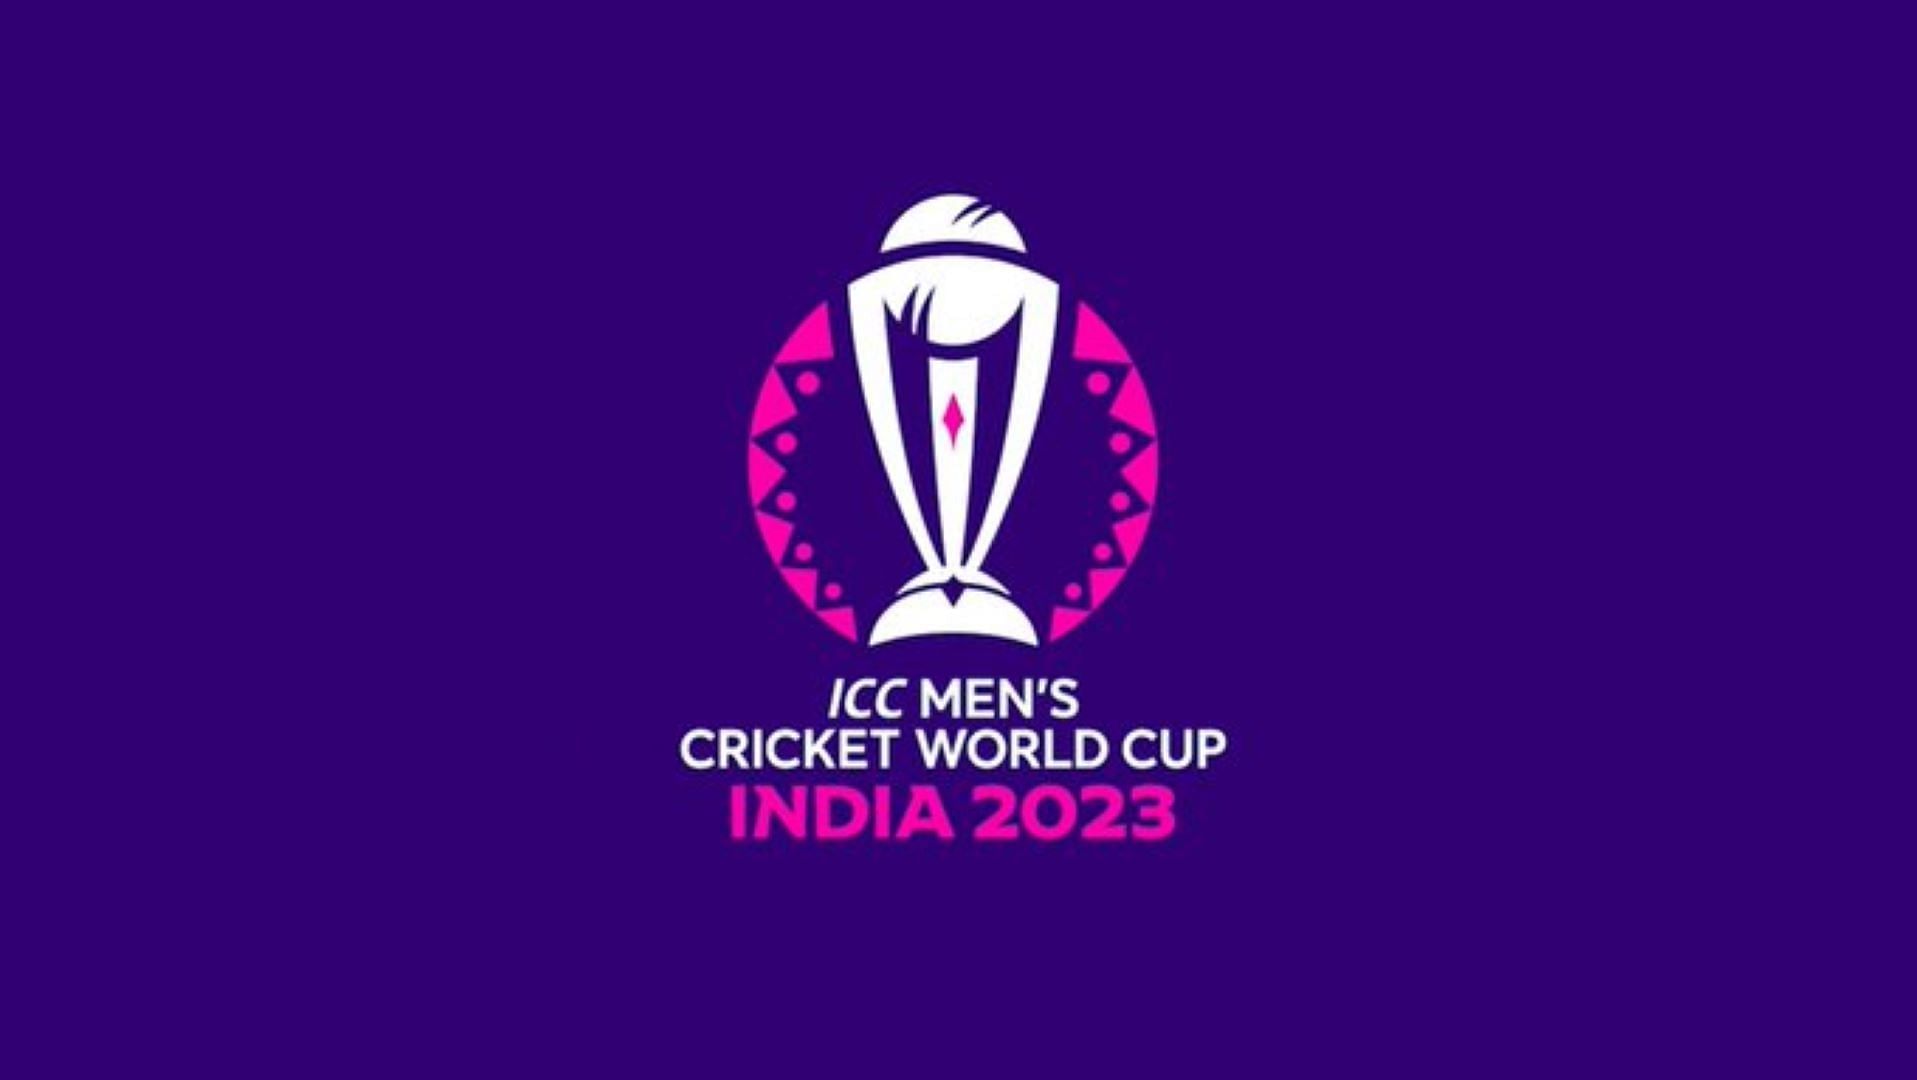 ICC honors the 12th anniversary of India's 2011 Cricket World Cup